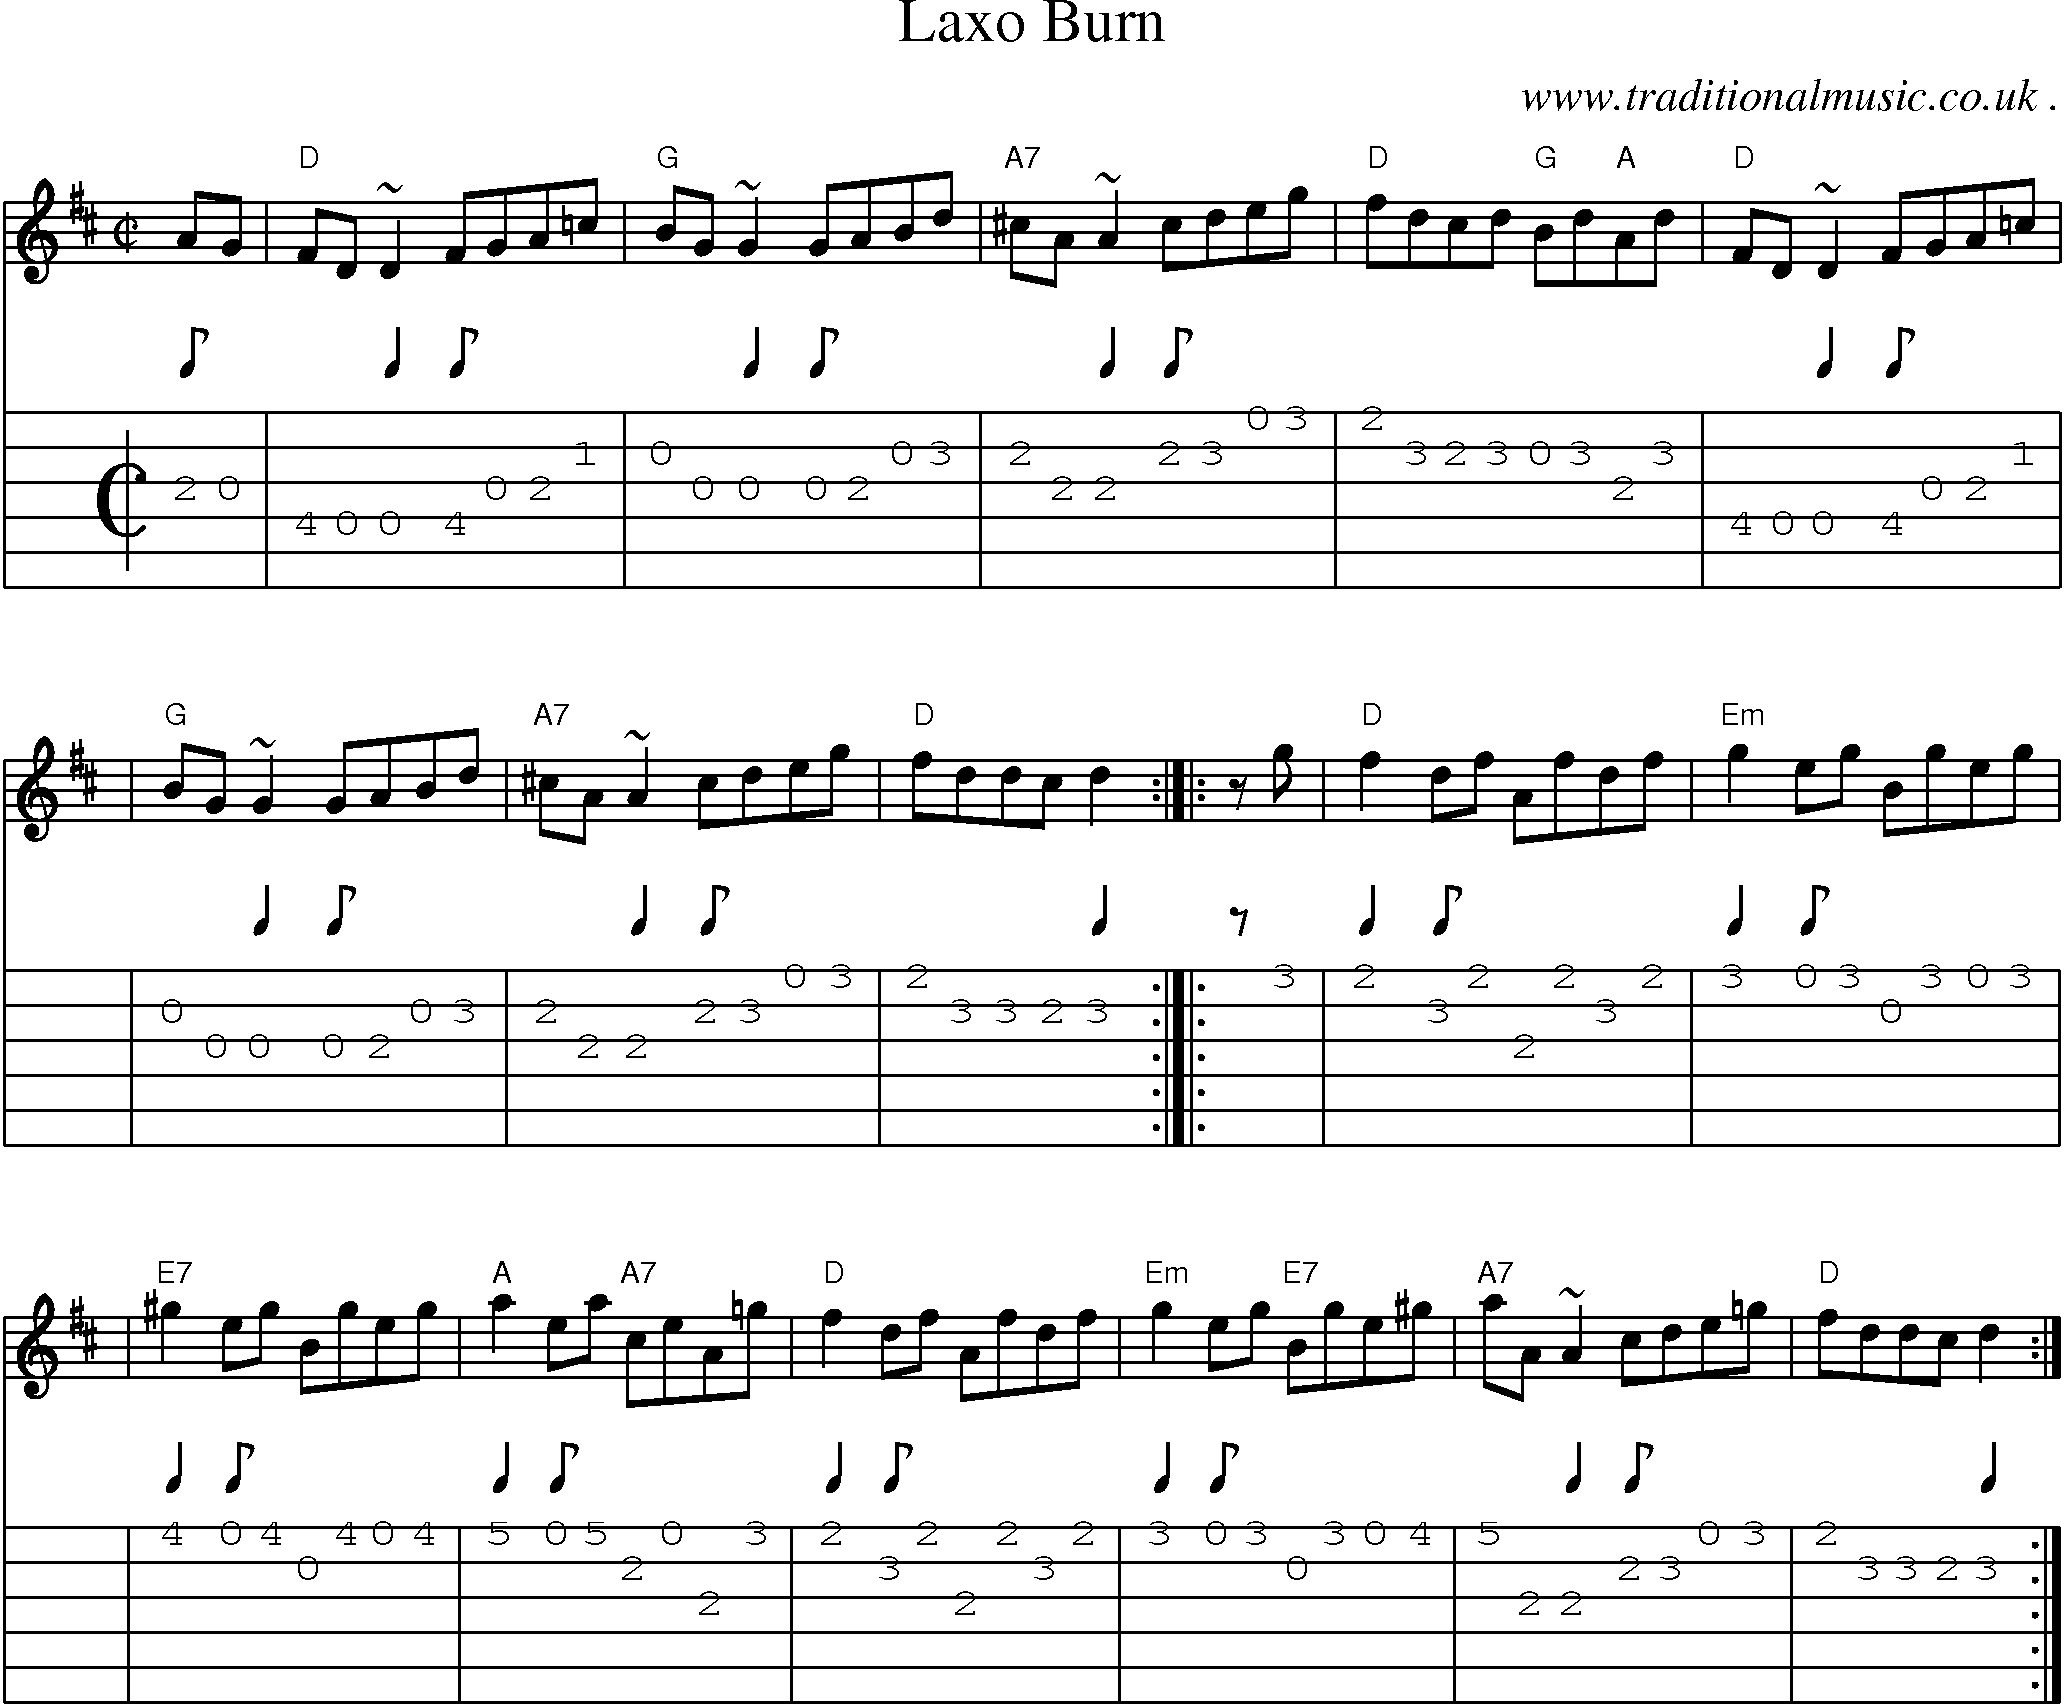 Sheet-music  score, Chords and Guitar Tabs for Laxo Burn